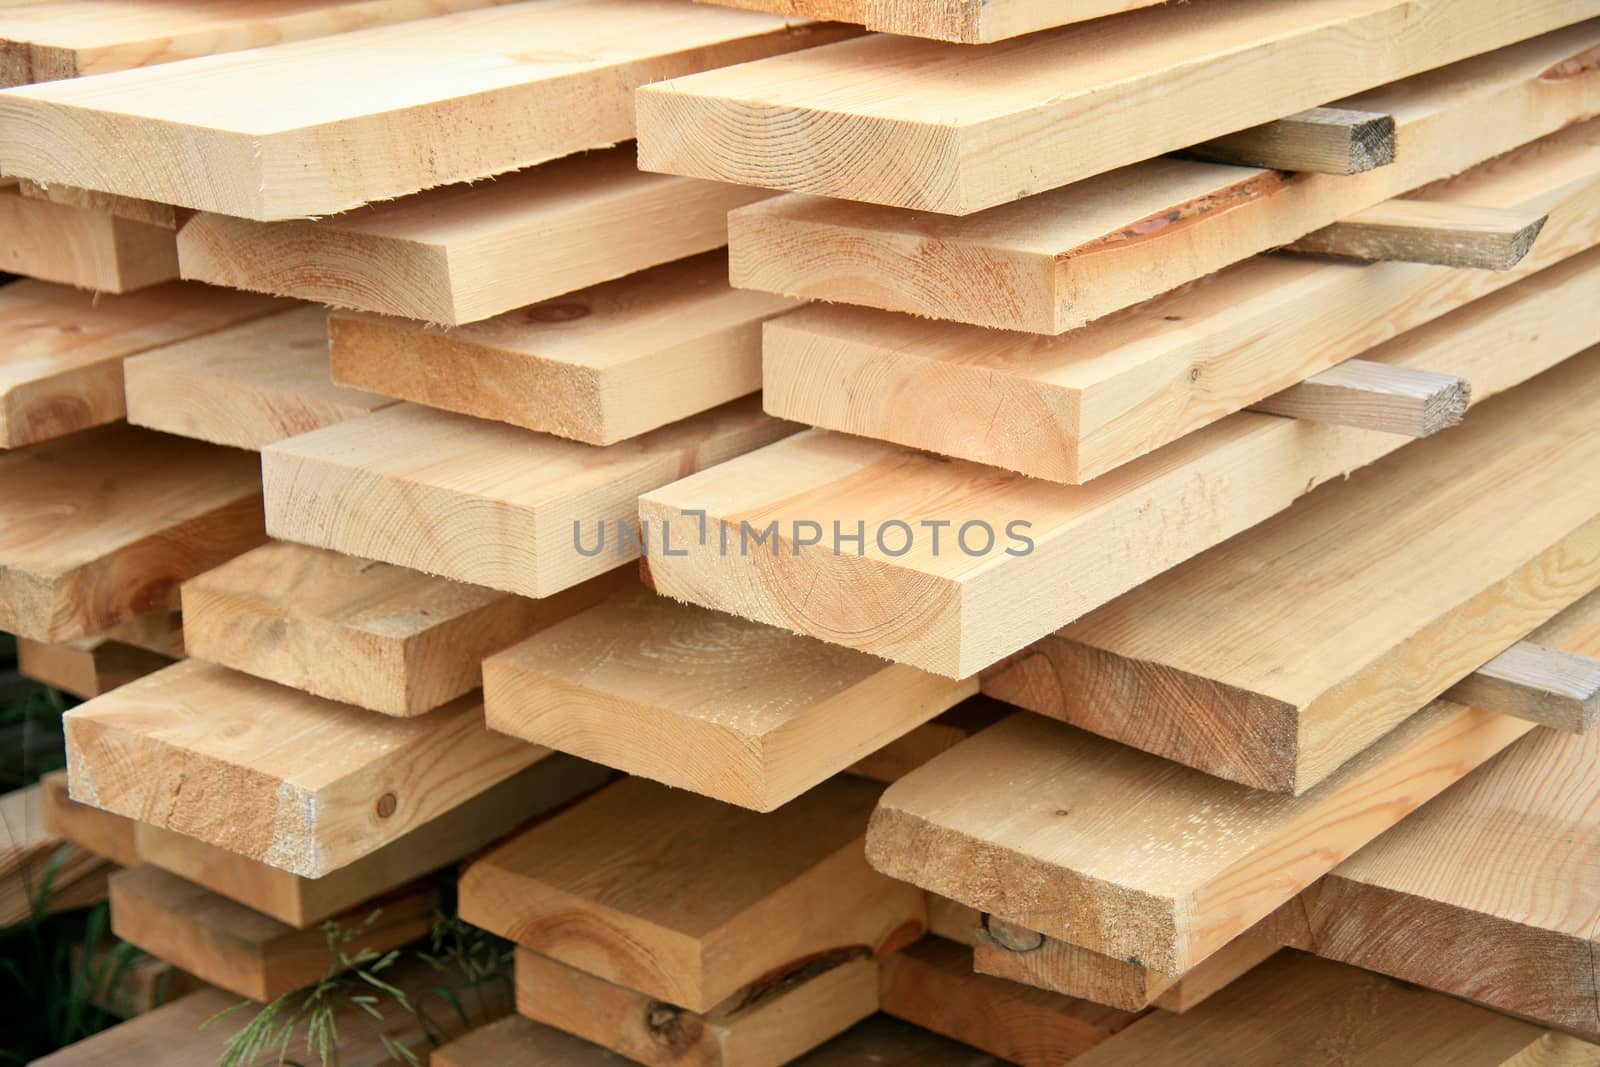 New pine boards in stacks outside